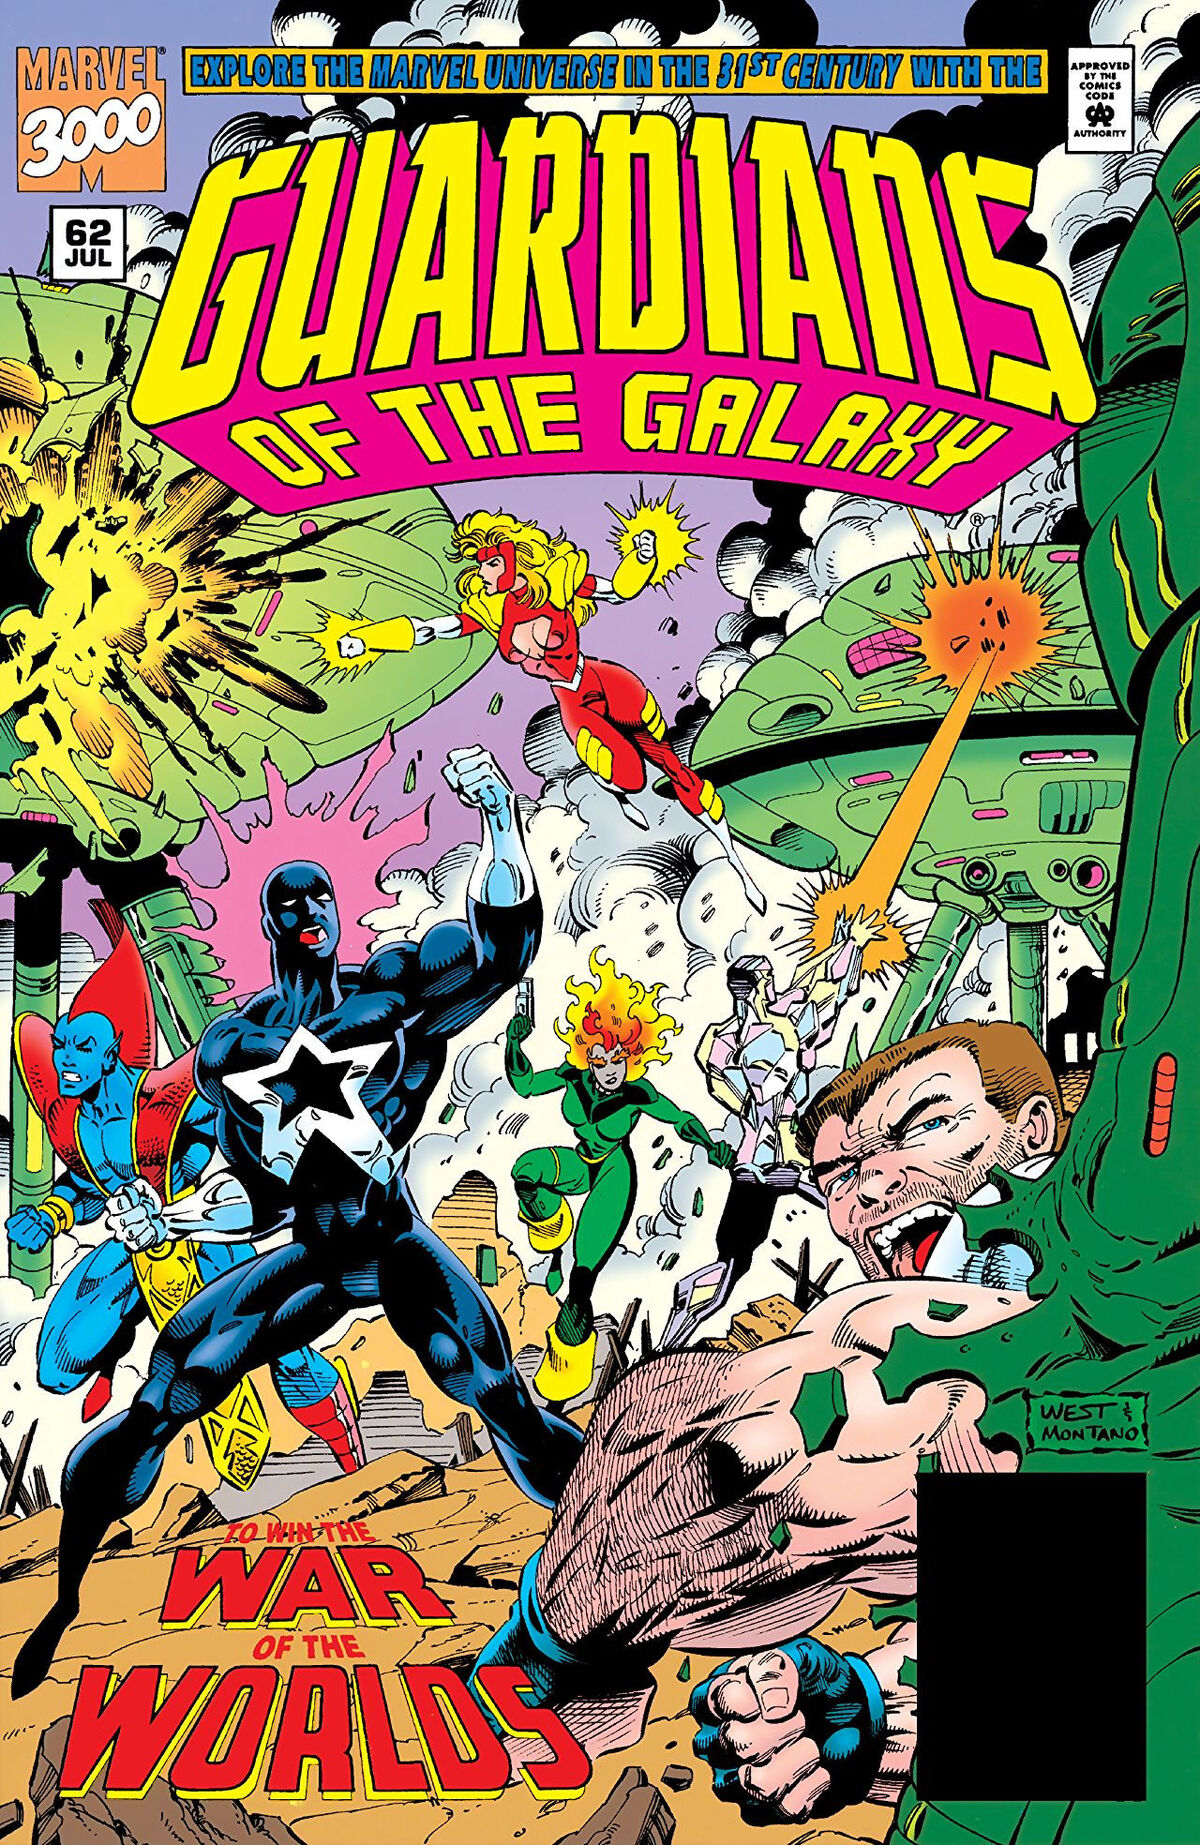 Guardians of the Galaxy (1969 team) - Wikipedia